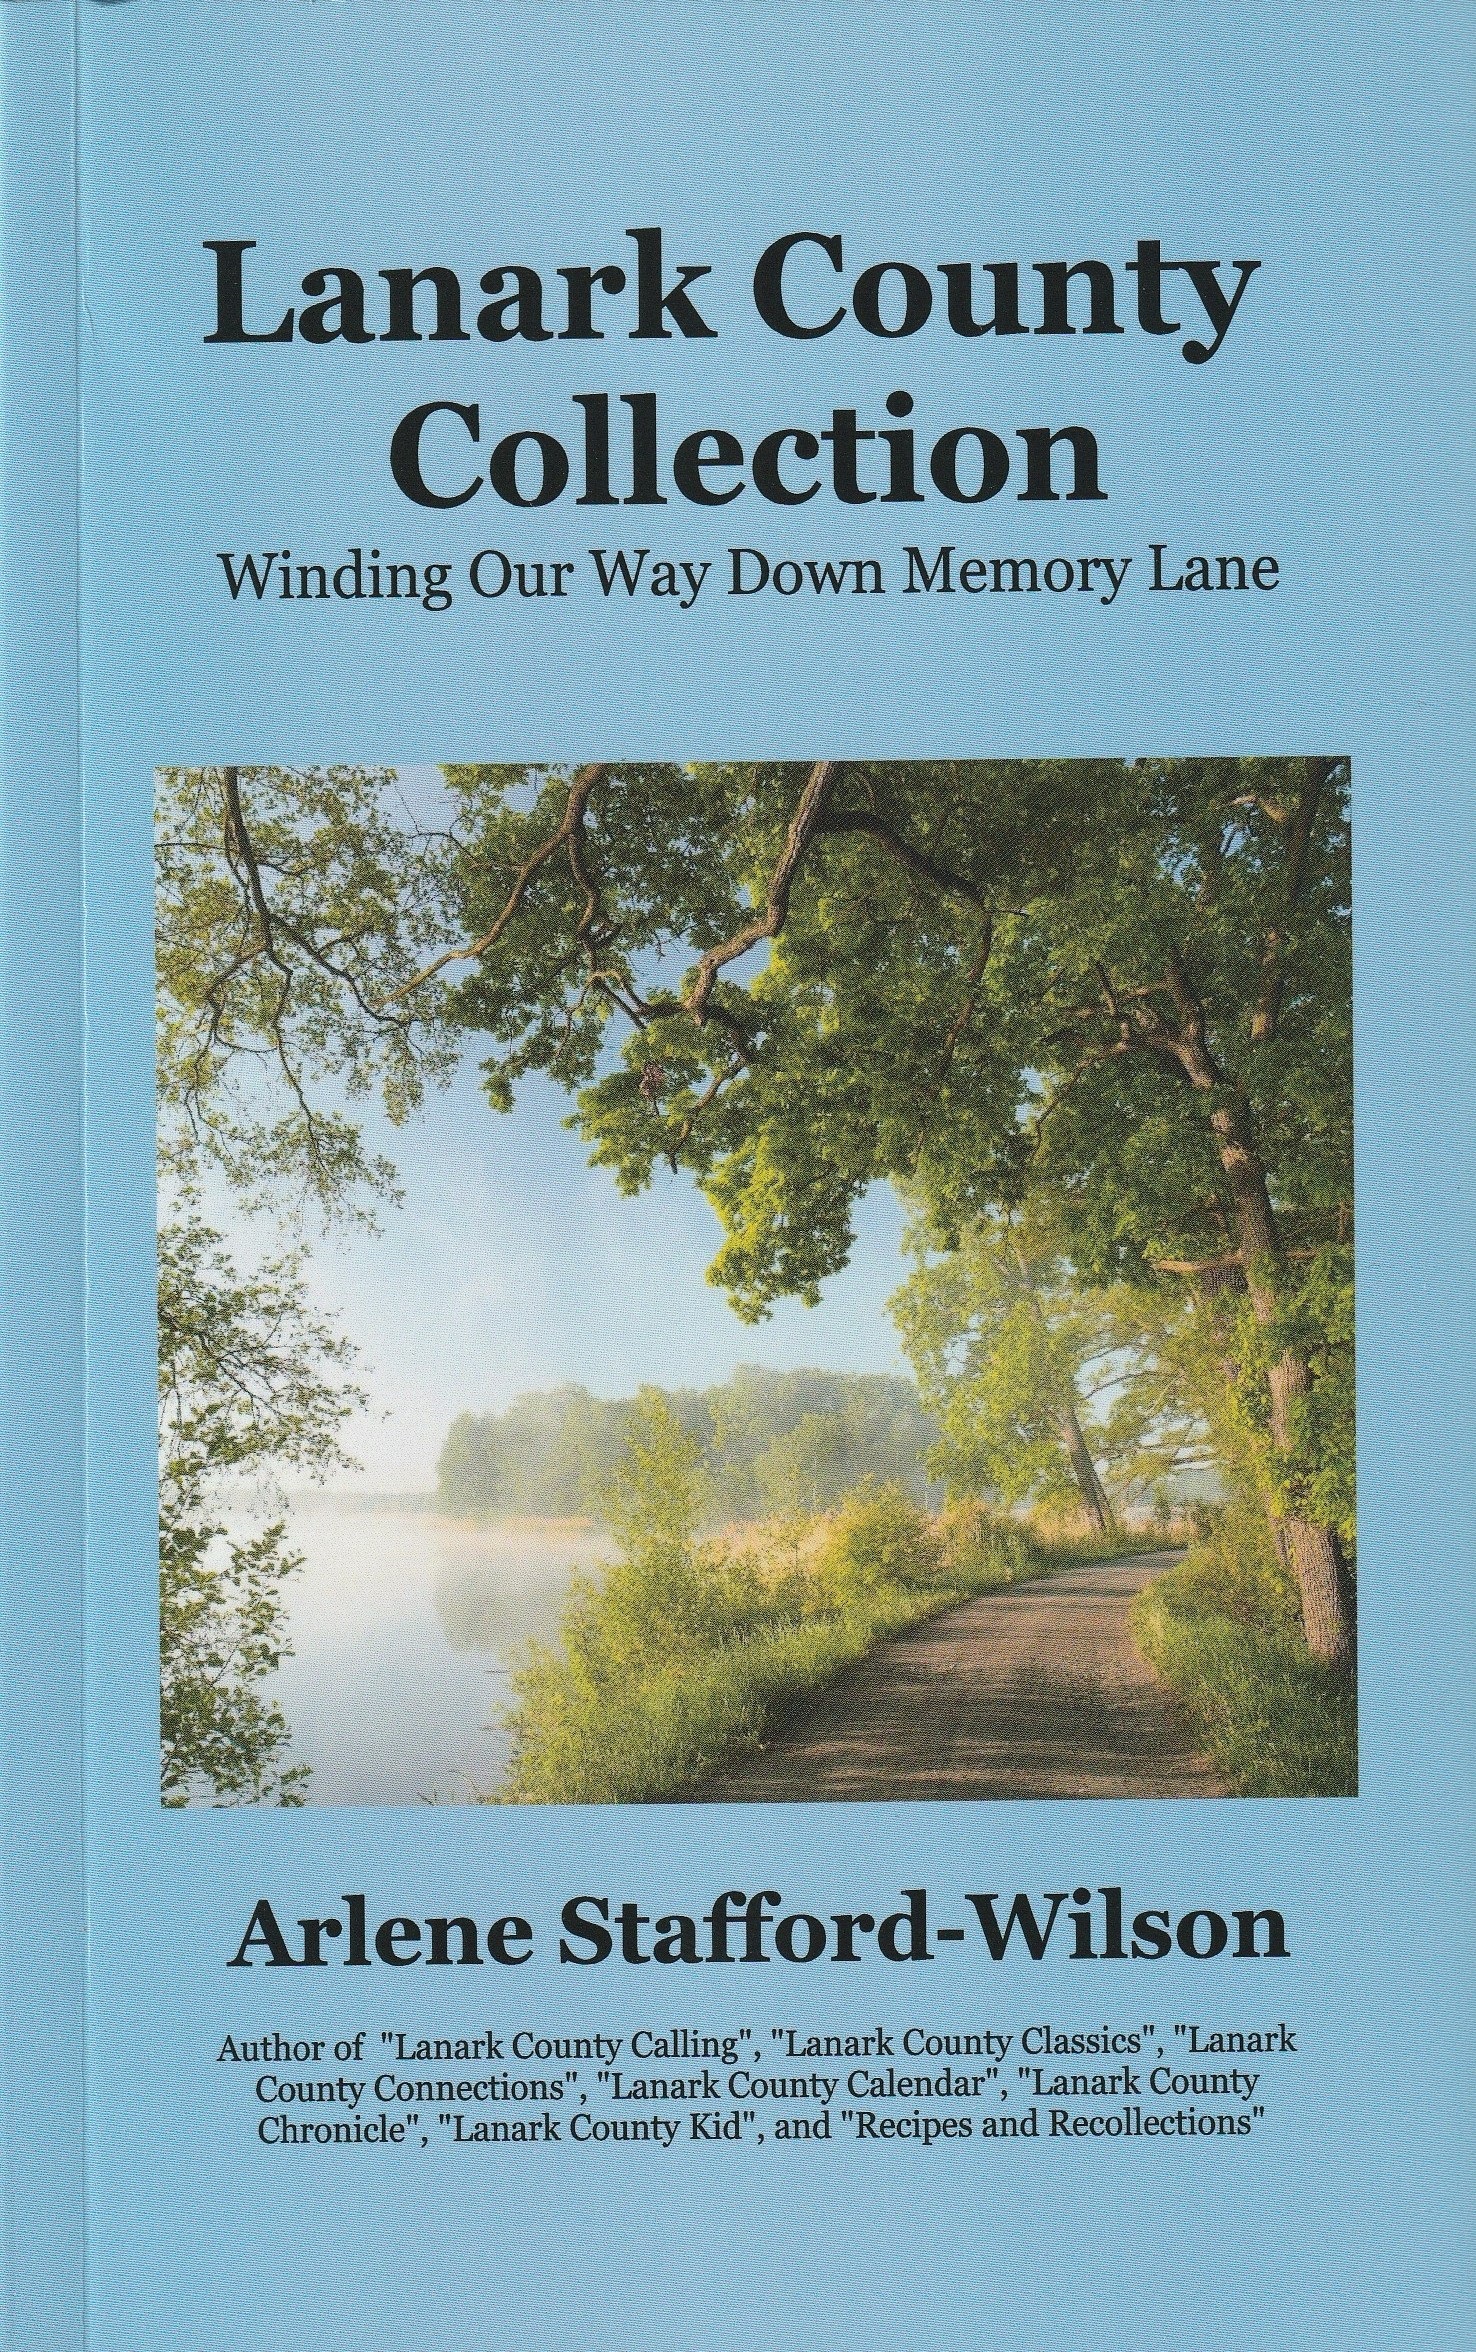 Lanark County Collection cover 20 02 21